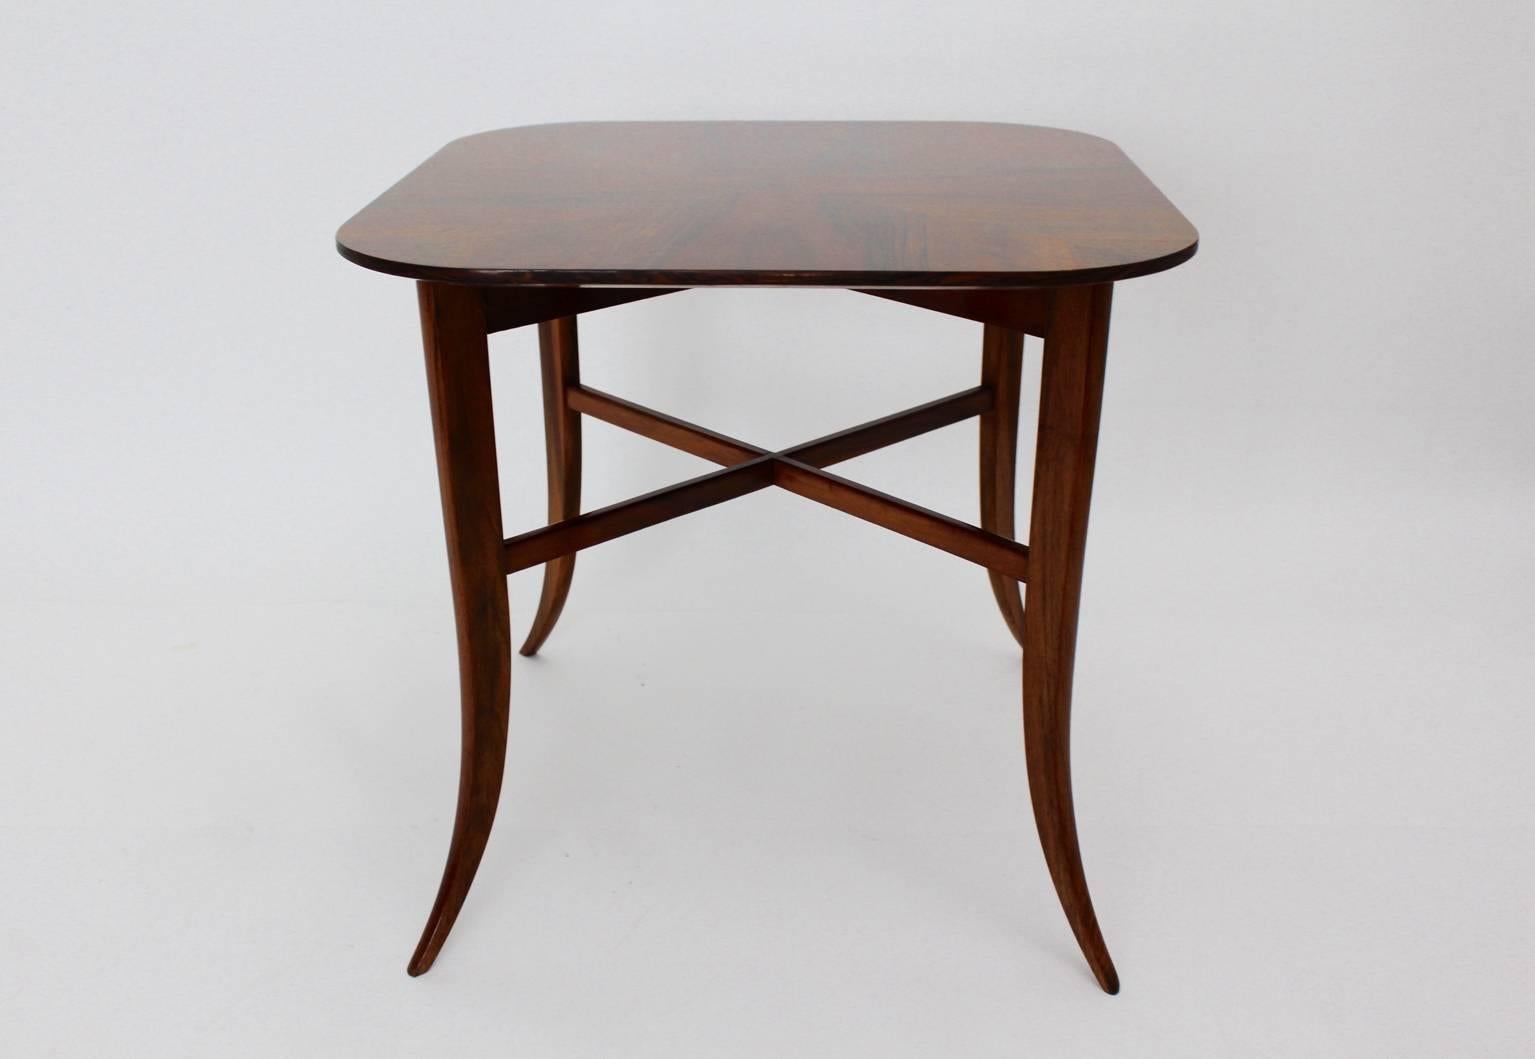 Austrian Art Deco Vintage Walnut Coffee Table or Side Table by Josef Frank, 1930s, Vienna For Sale